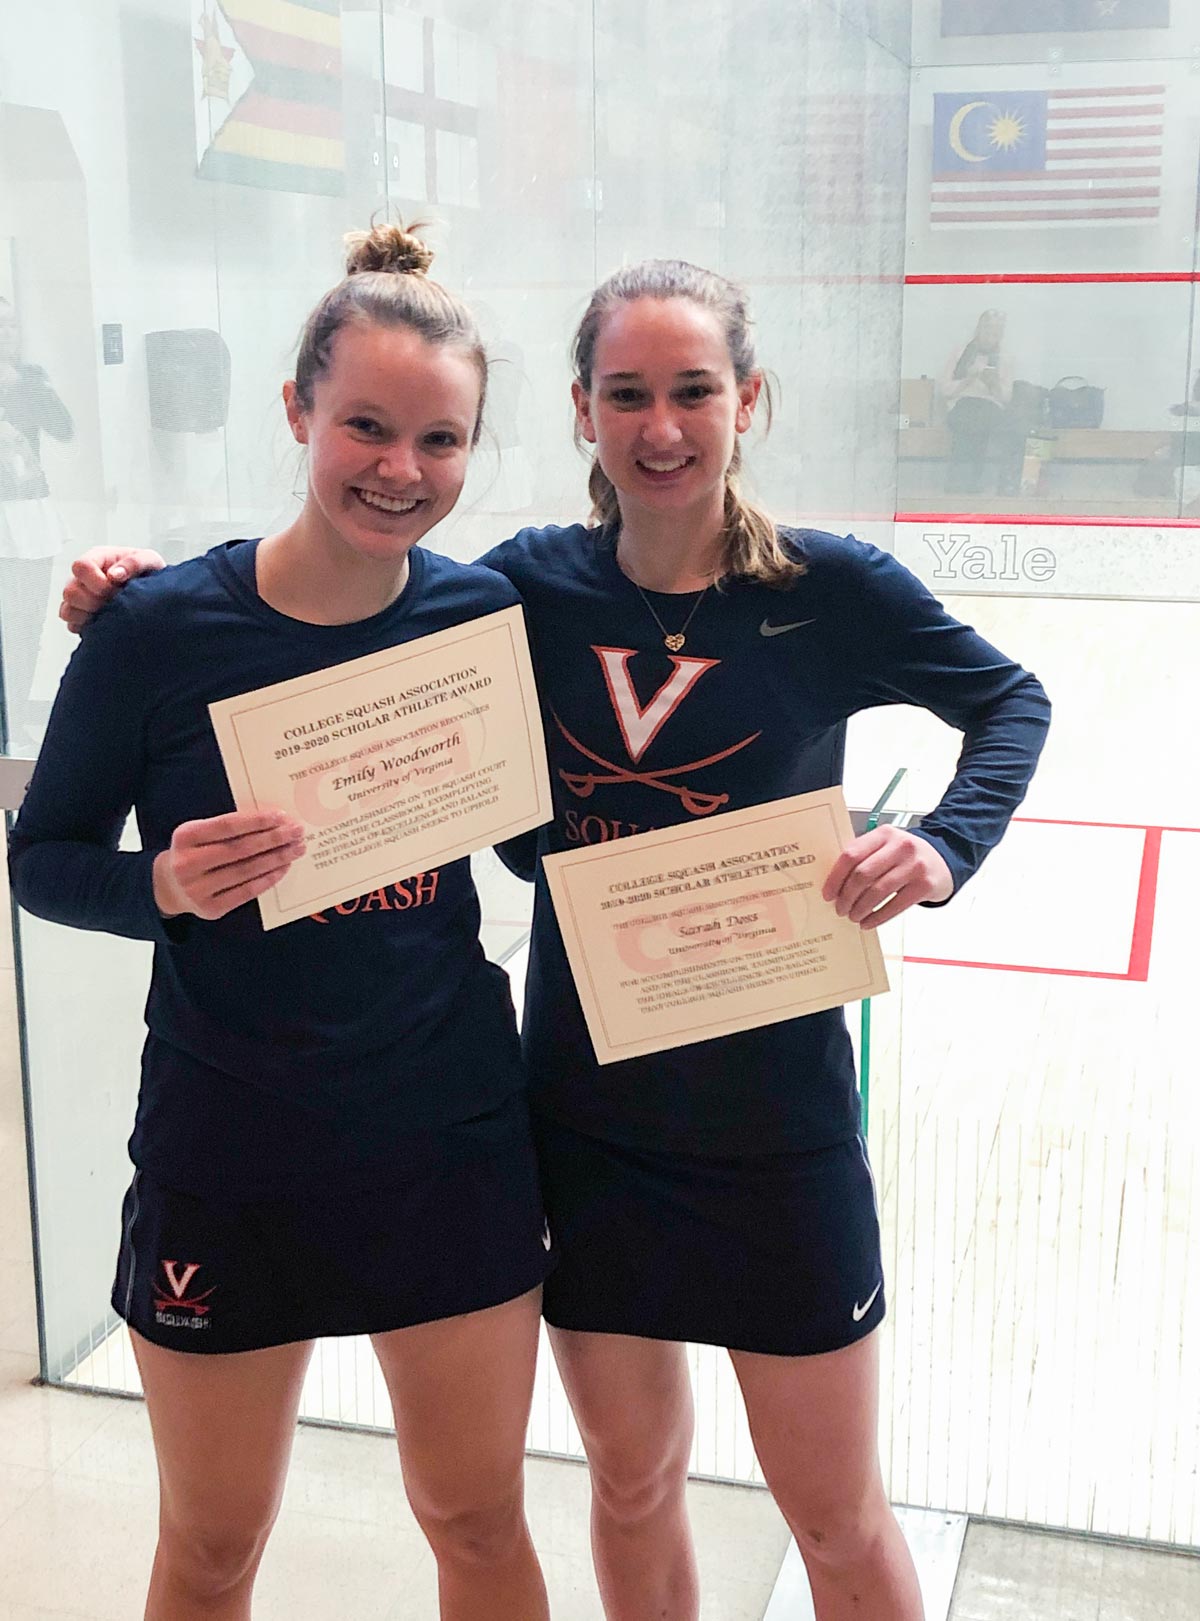 Emily Woodsworth, left, and Sarah Doss, stand together for a picture while holding certificates for being named the College Squash Association